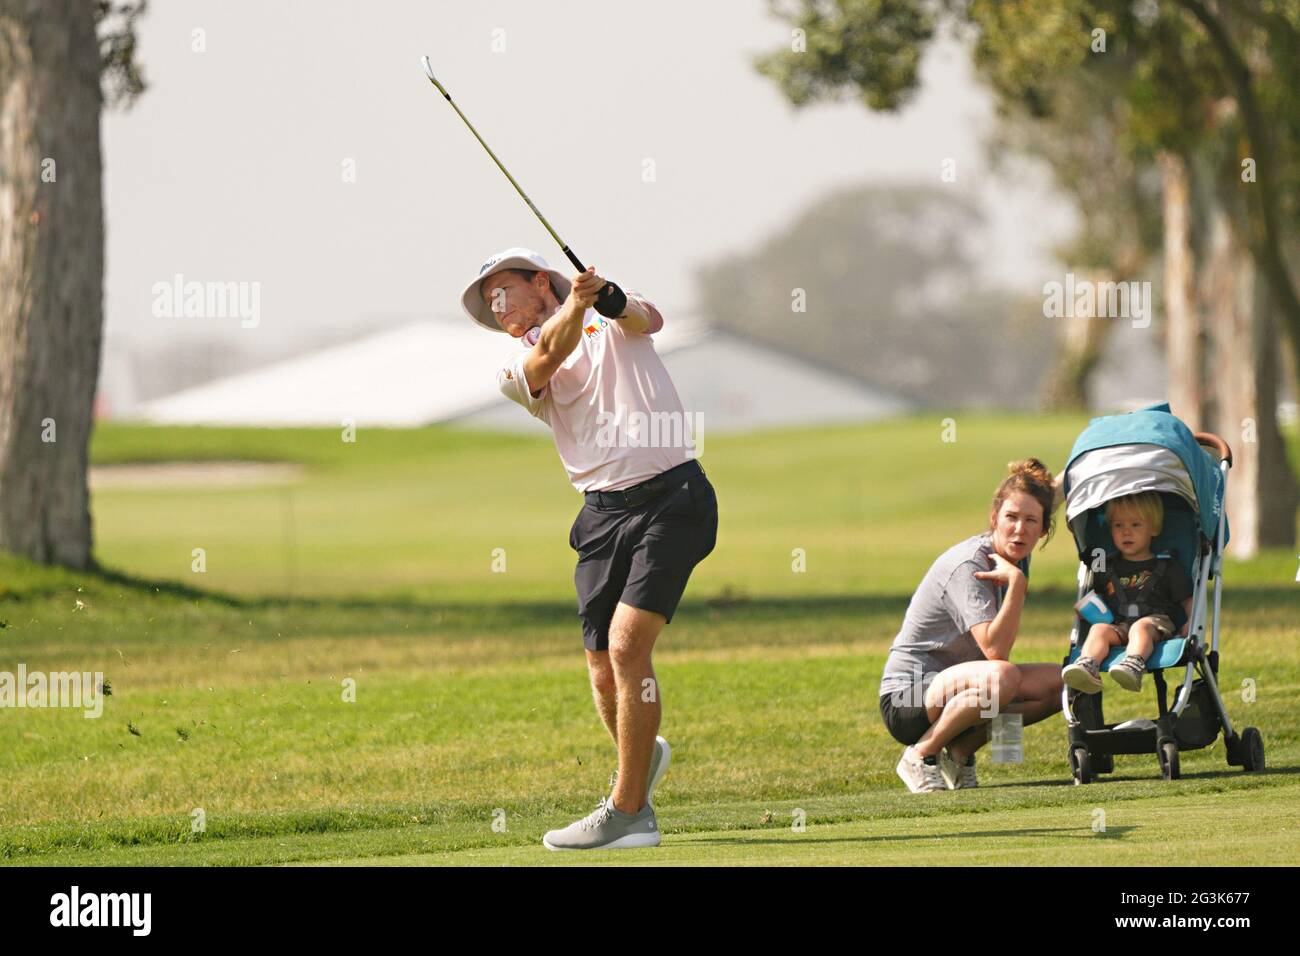 San Diego, United States. 16th June, 2021. Peter Malnati of the USA, hits a shot on the 7th green as his wife and child look on during practice day at the 121st US Open Championship at Torrey Pines Golf Course in San Diego, California on Wednesday, June 16, 2021. Photo by Richard Ellis/UPI Credit: UPI/Alamy Live News Stock Photo